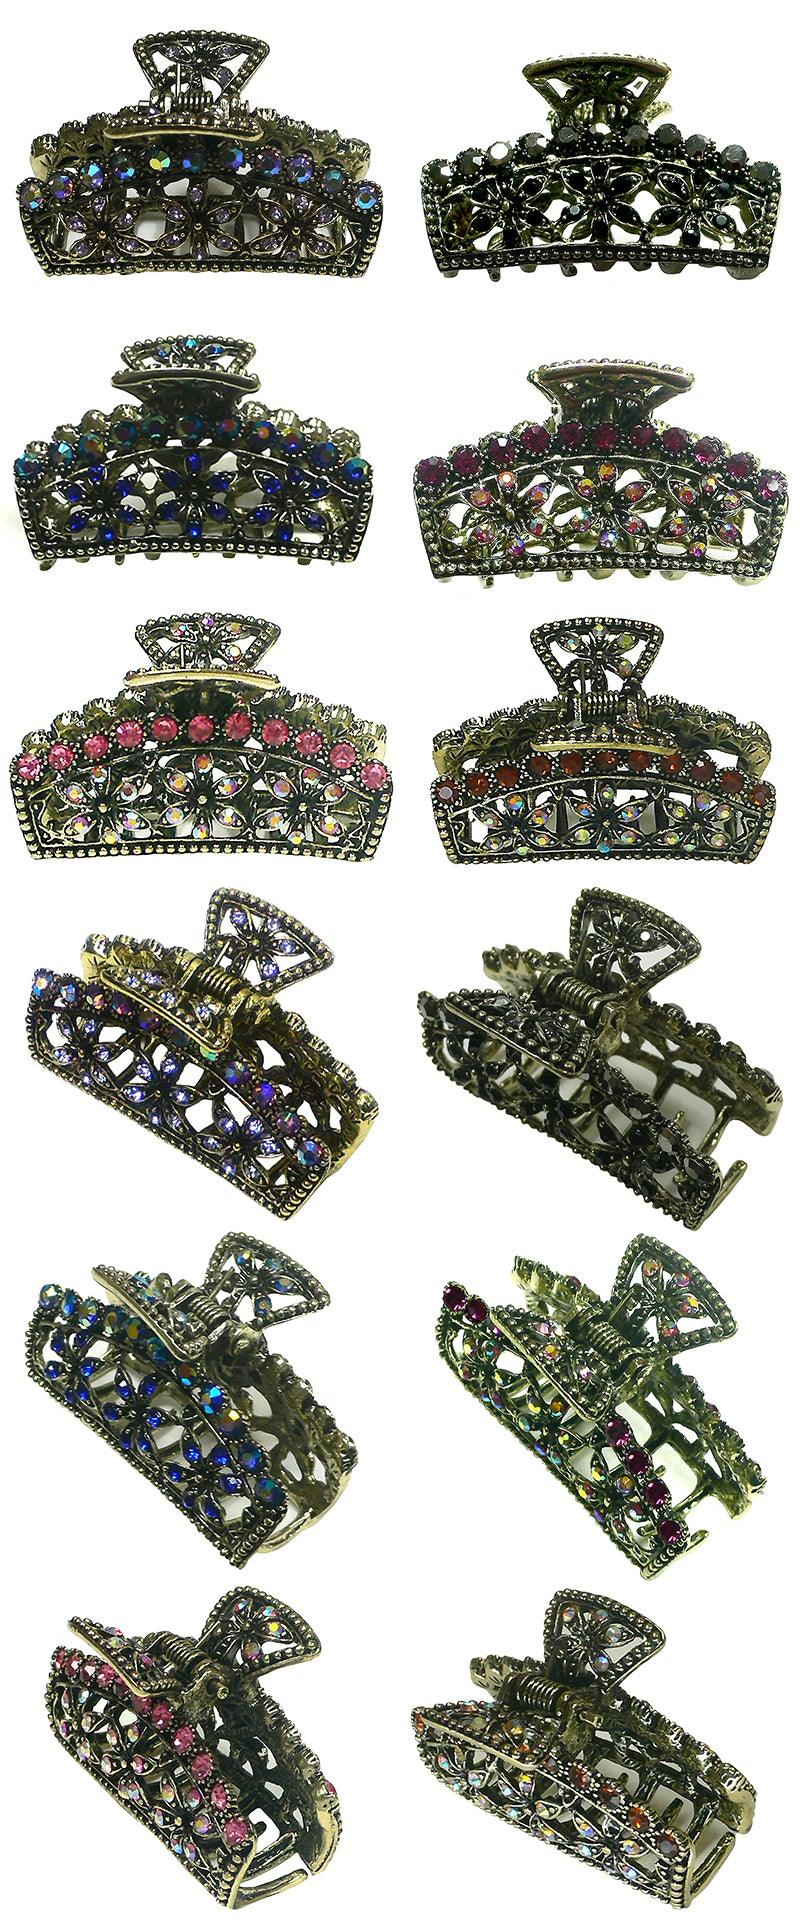 Dozen Pack Small Metal Crystal Jaw Clips Hair Claws Clips RW4927-D - Bella Fashion Wholesale